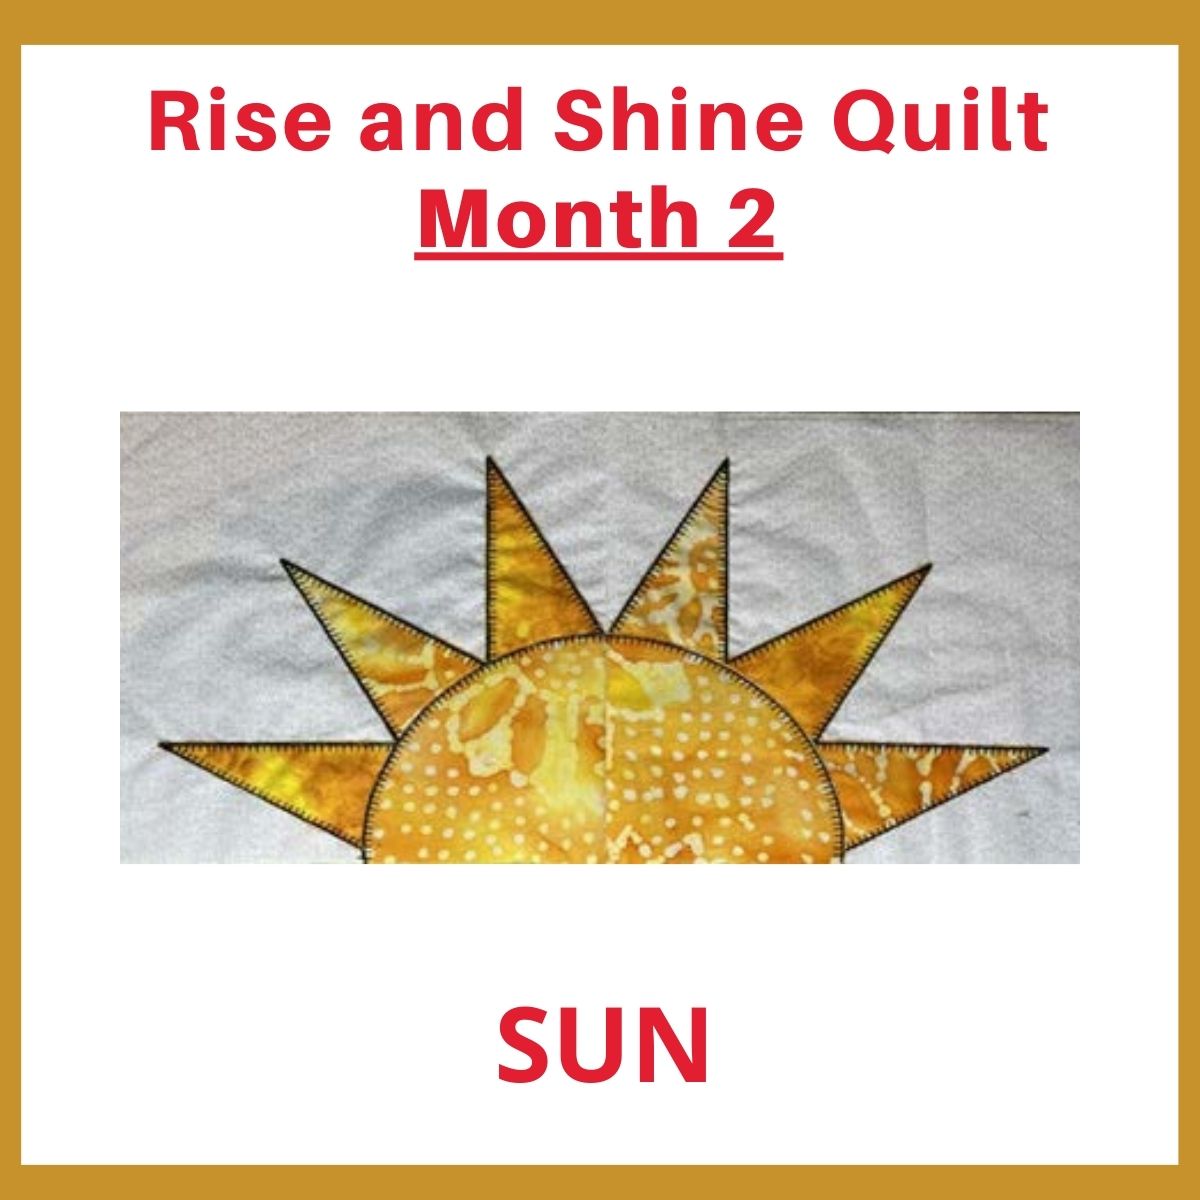 Rise and Shine! New Quilt Kit! #TulaTalk  Rise and Shine! New Quilt Kit!  #TulaTalk Happy Tuesday! We hope everyone has been staying cool lately  because it's been way too HOT here